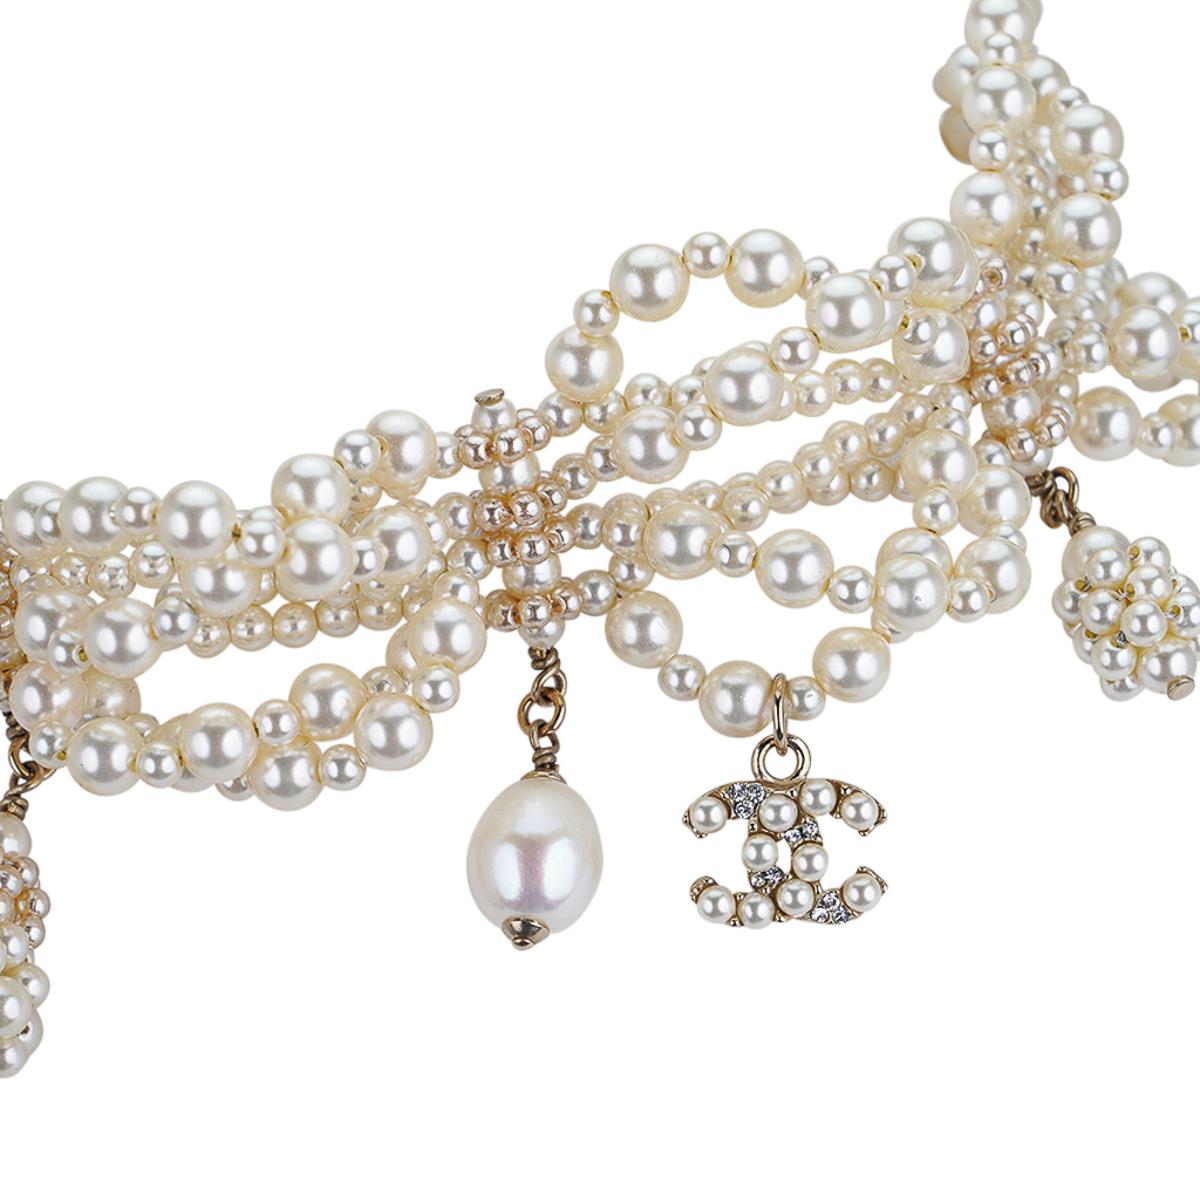 Mightychic offers a very rare Guaranteed authentic very rare Chanel 2105A limited edition fresh water pearl choker.
Entwined pearls with pearls and peral CC dangle form the choker
Unmistakably Chanel.
Comes with Chanel packaging.
final